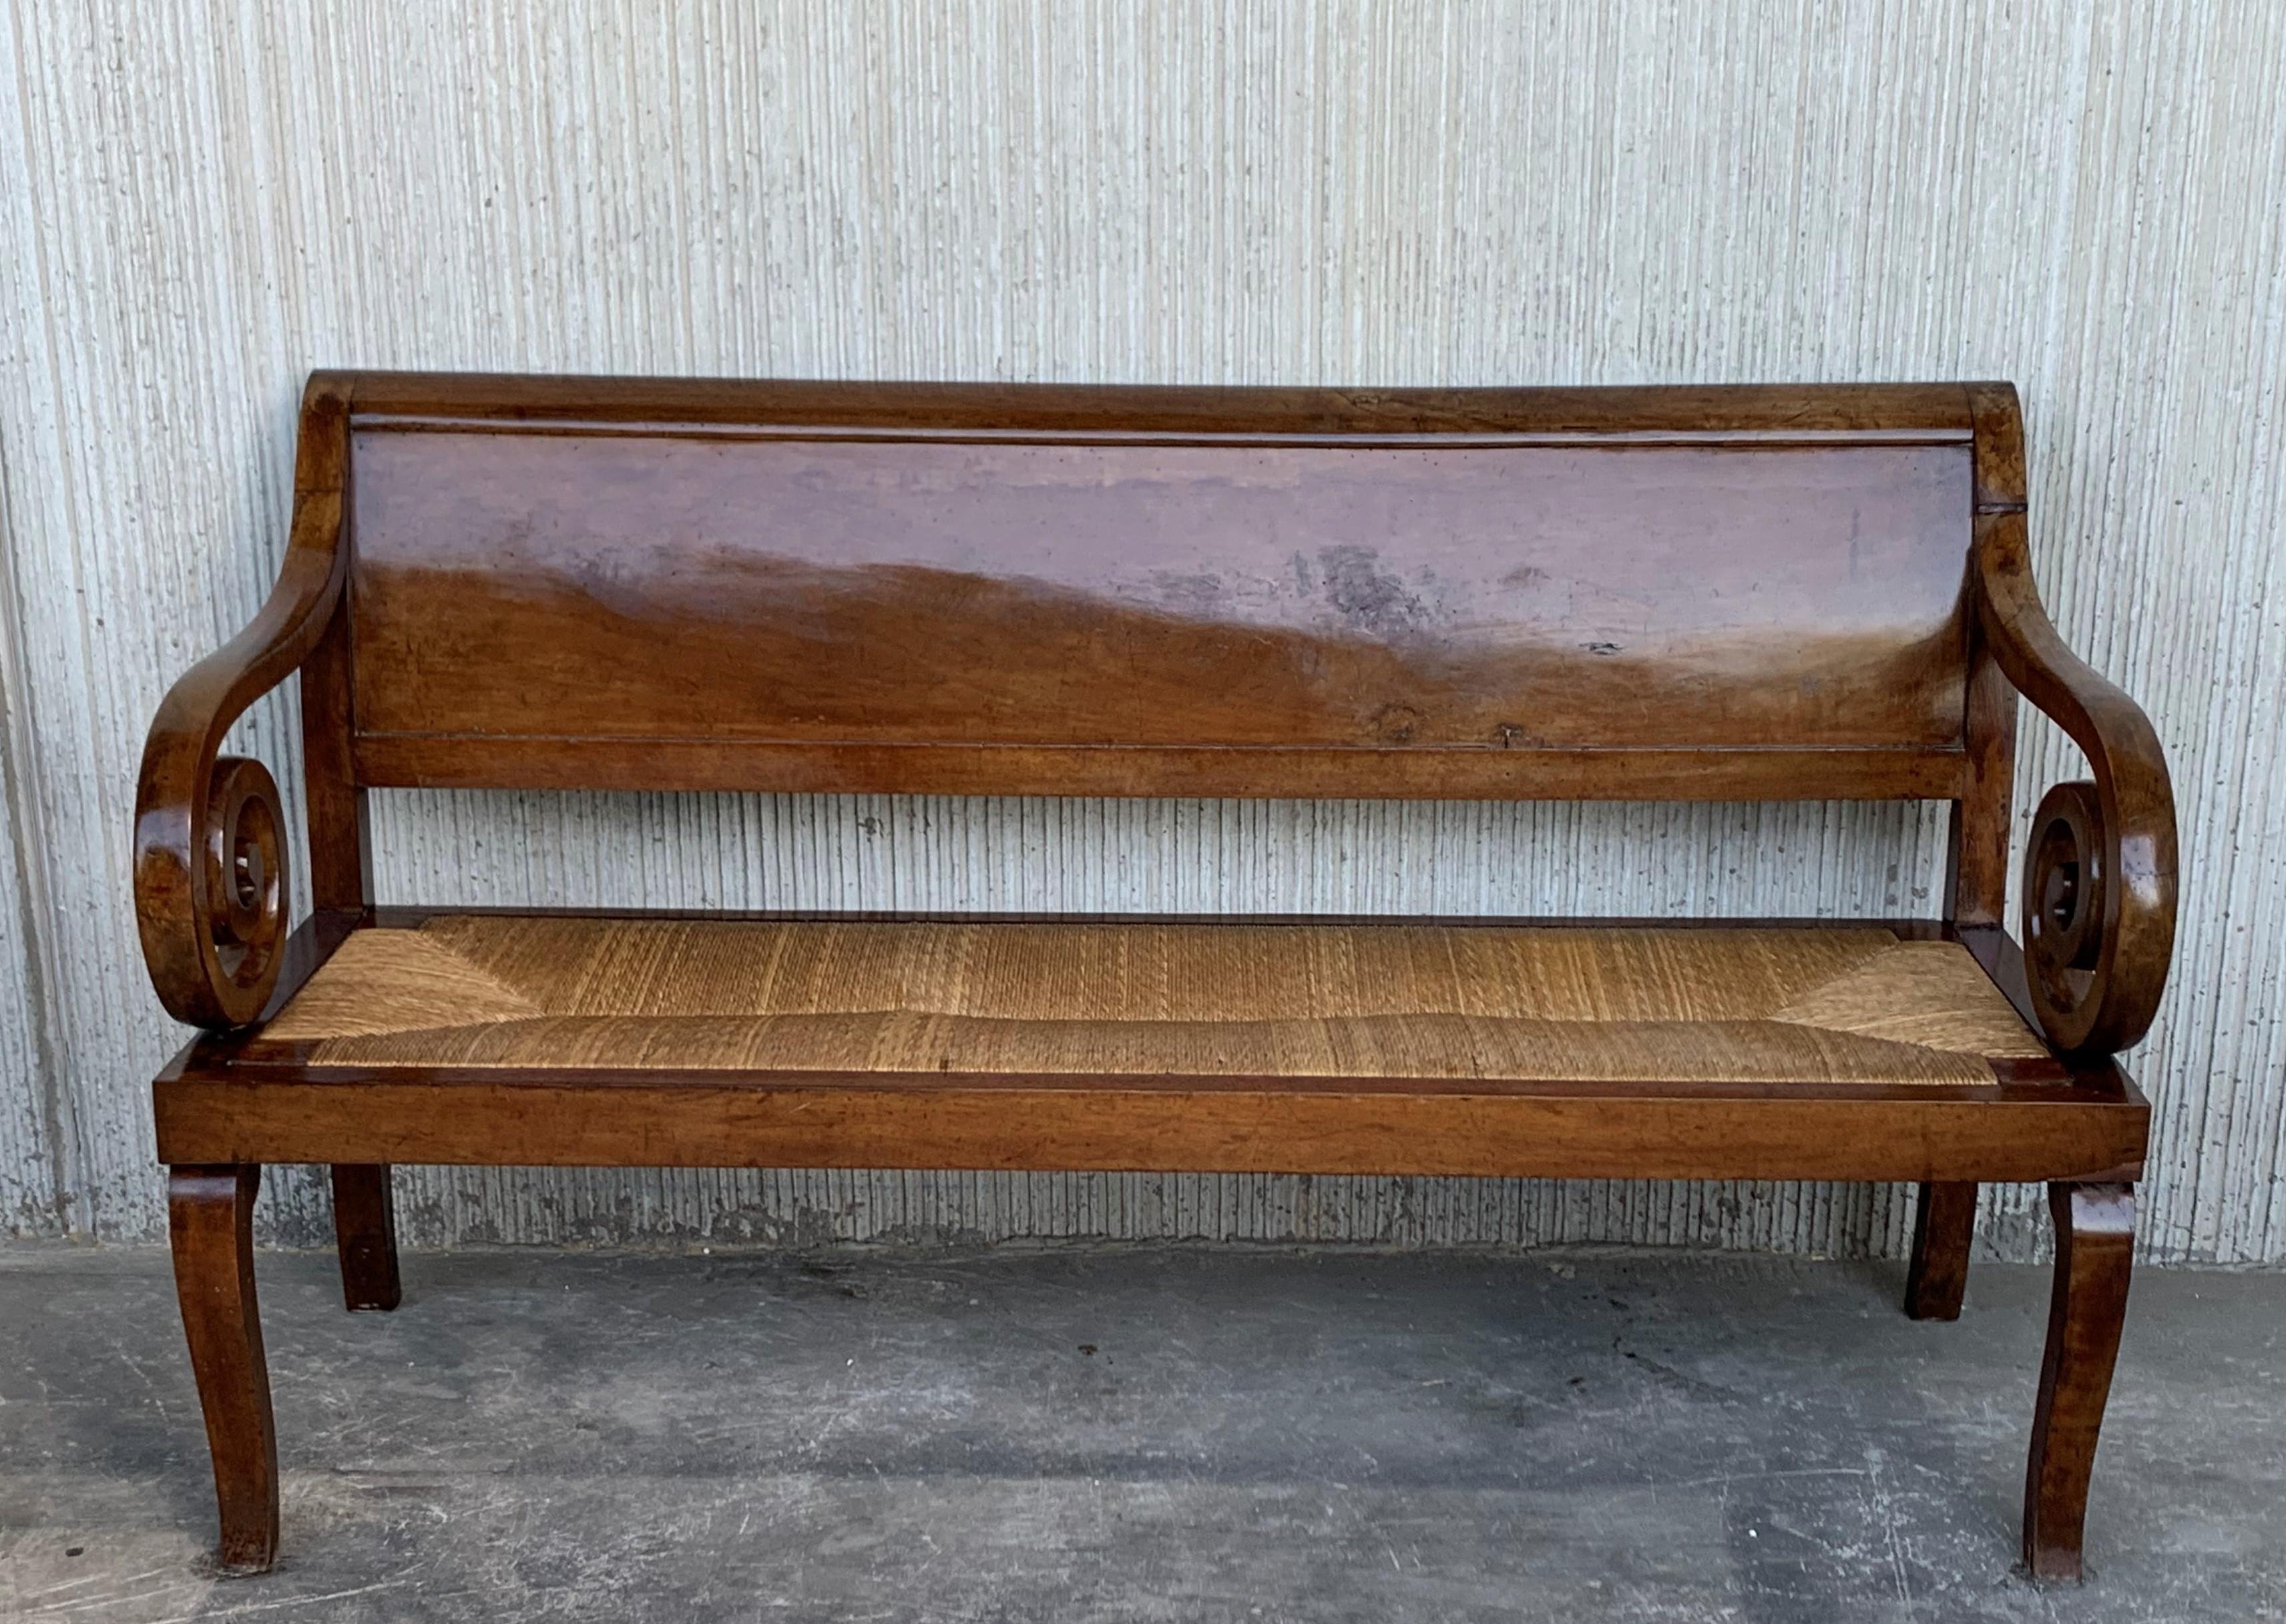 Spanish 19th Century Large Catalan Bench in Walnut with Caned Seat